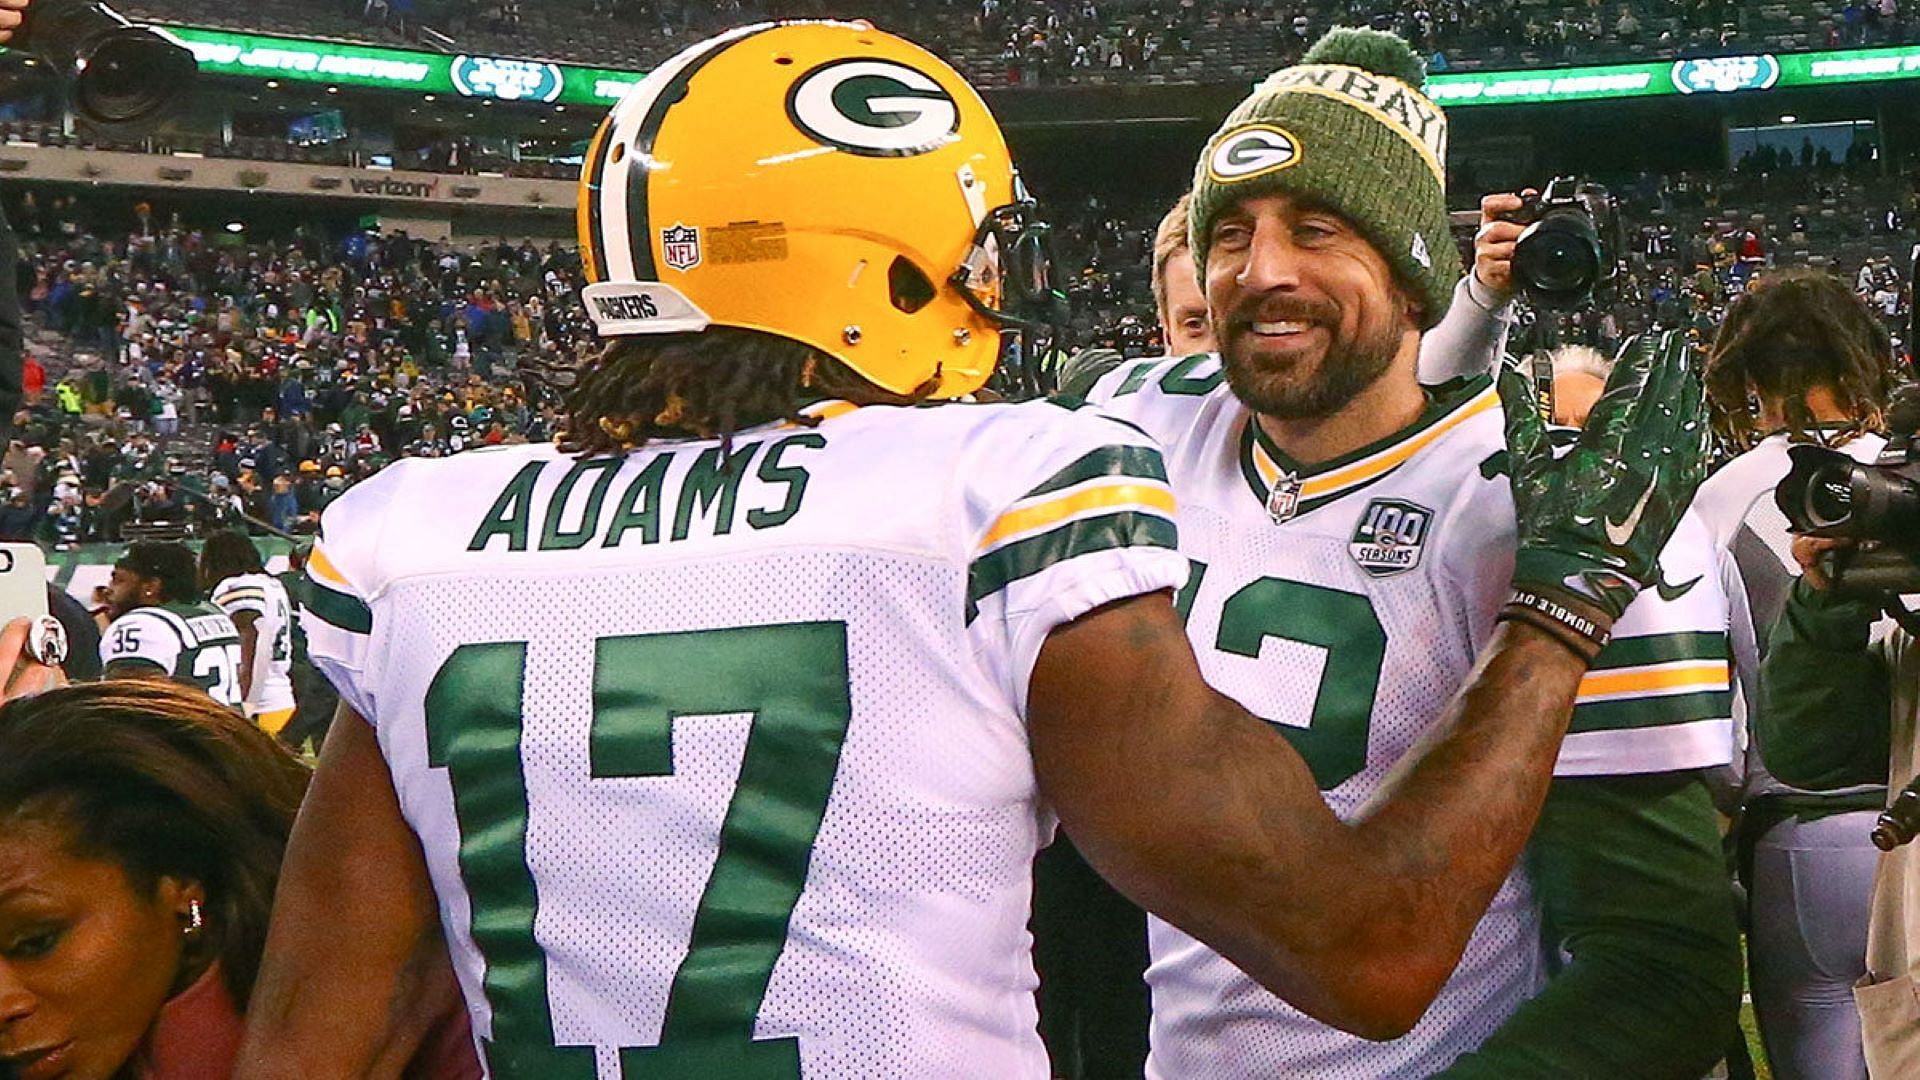 The Packers offensive duo following a game against the Jets.